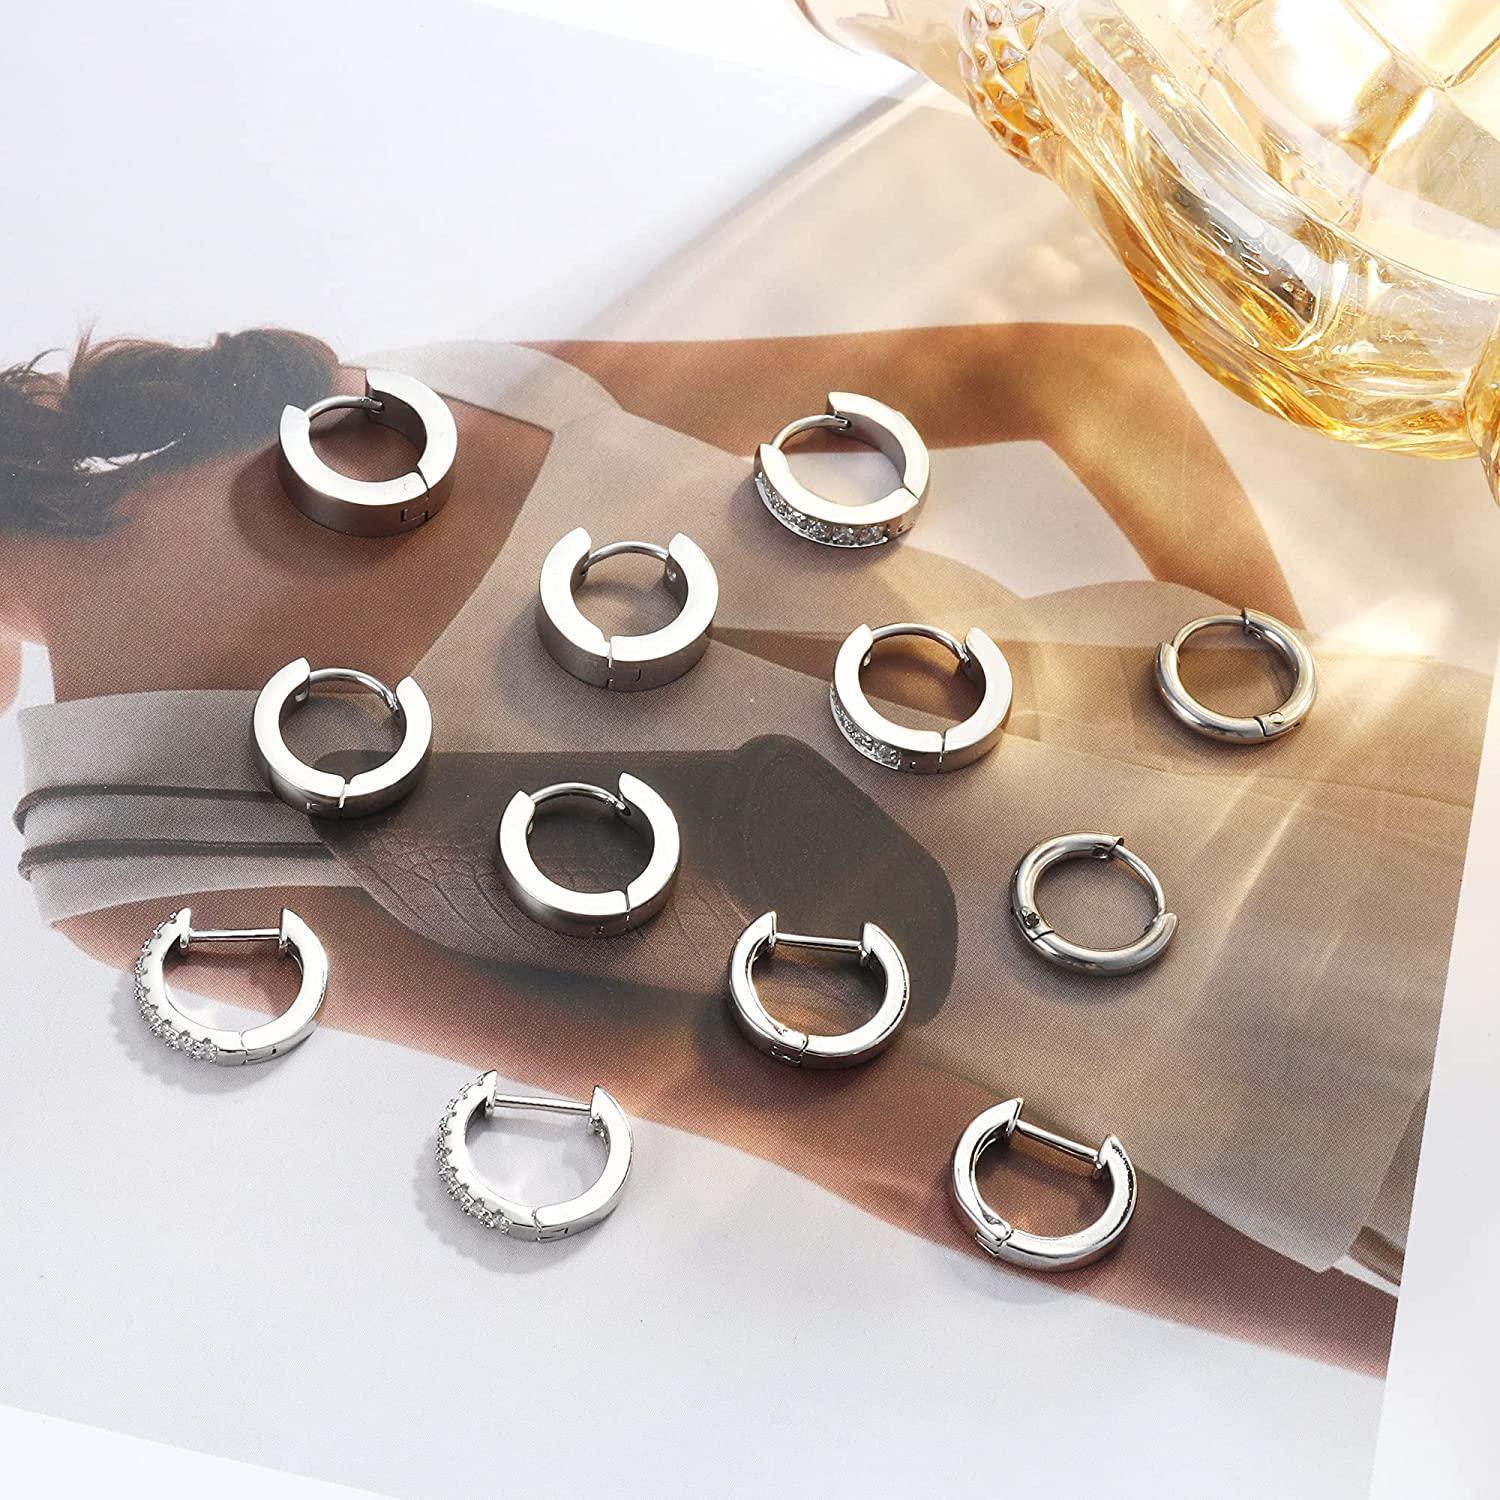 A collection of twelve 6Pairs Huggie Hoop Earrings for Women Men 14K Gold Plated Cubic Zirconia Small Hoop Earrings Tiny Cartilage Helix Daith Earrings Minimalist Ear Piercing Sets in various designs, some plain and others adorned with tiny rhinestones, displayed on a white background.